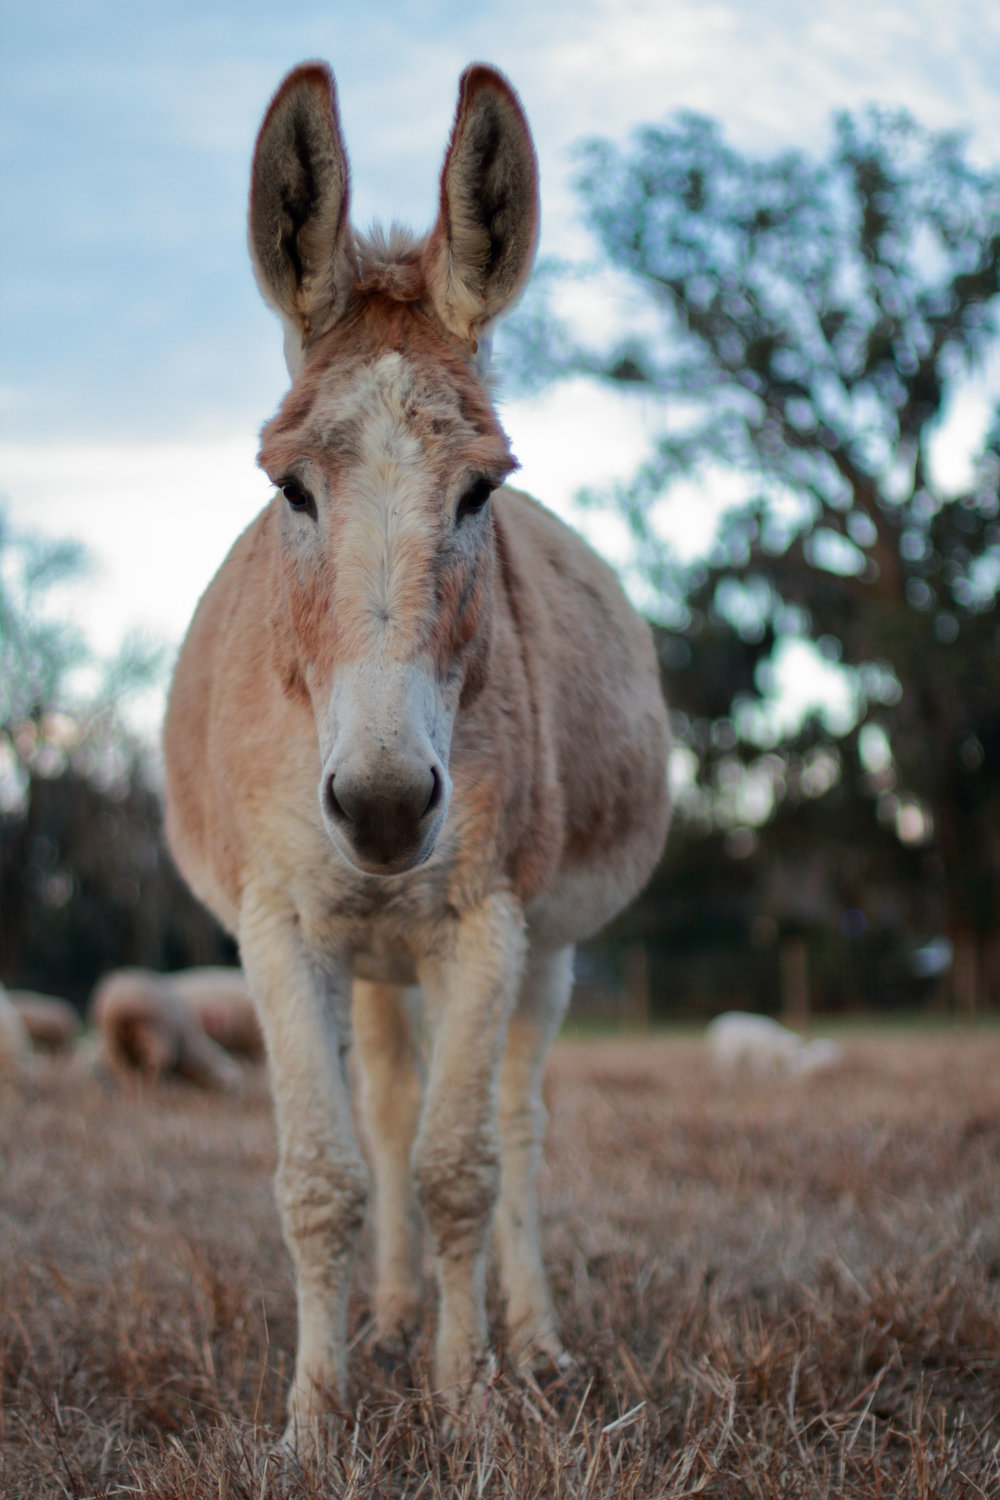 Donkeys have fueled human agriculture throughout early history, and they continue to do so across the globe, especially in developing nations.